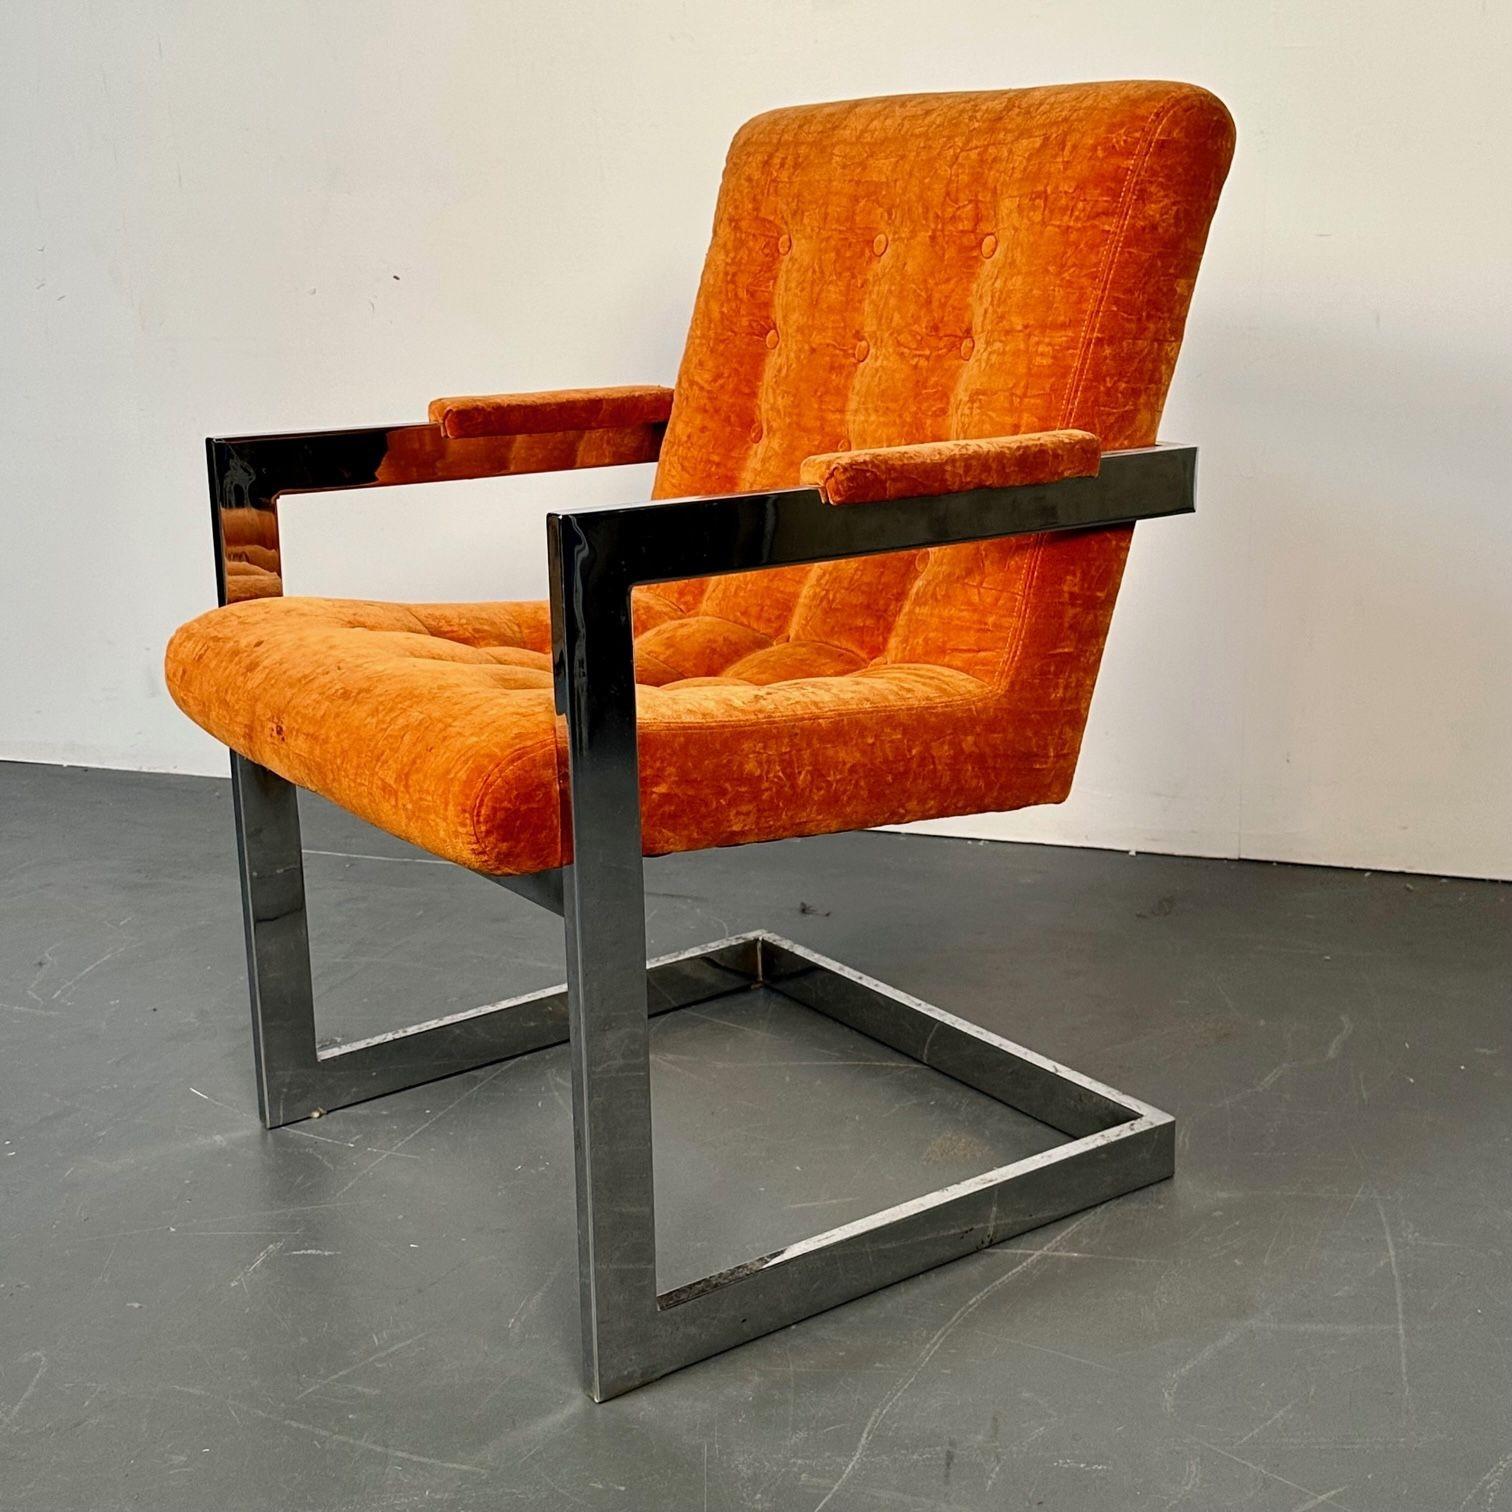 Mid-Century Modern Chrome Armchair by Milo Baughman for Directional, Single
 
Single modernist armchair designed by Milo Baughman for Directional Inc. 
 
Chrome, Fabric
United States, 1970s
Directional Inc.
 
Seat height: 18 inches
 
EXA